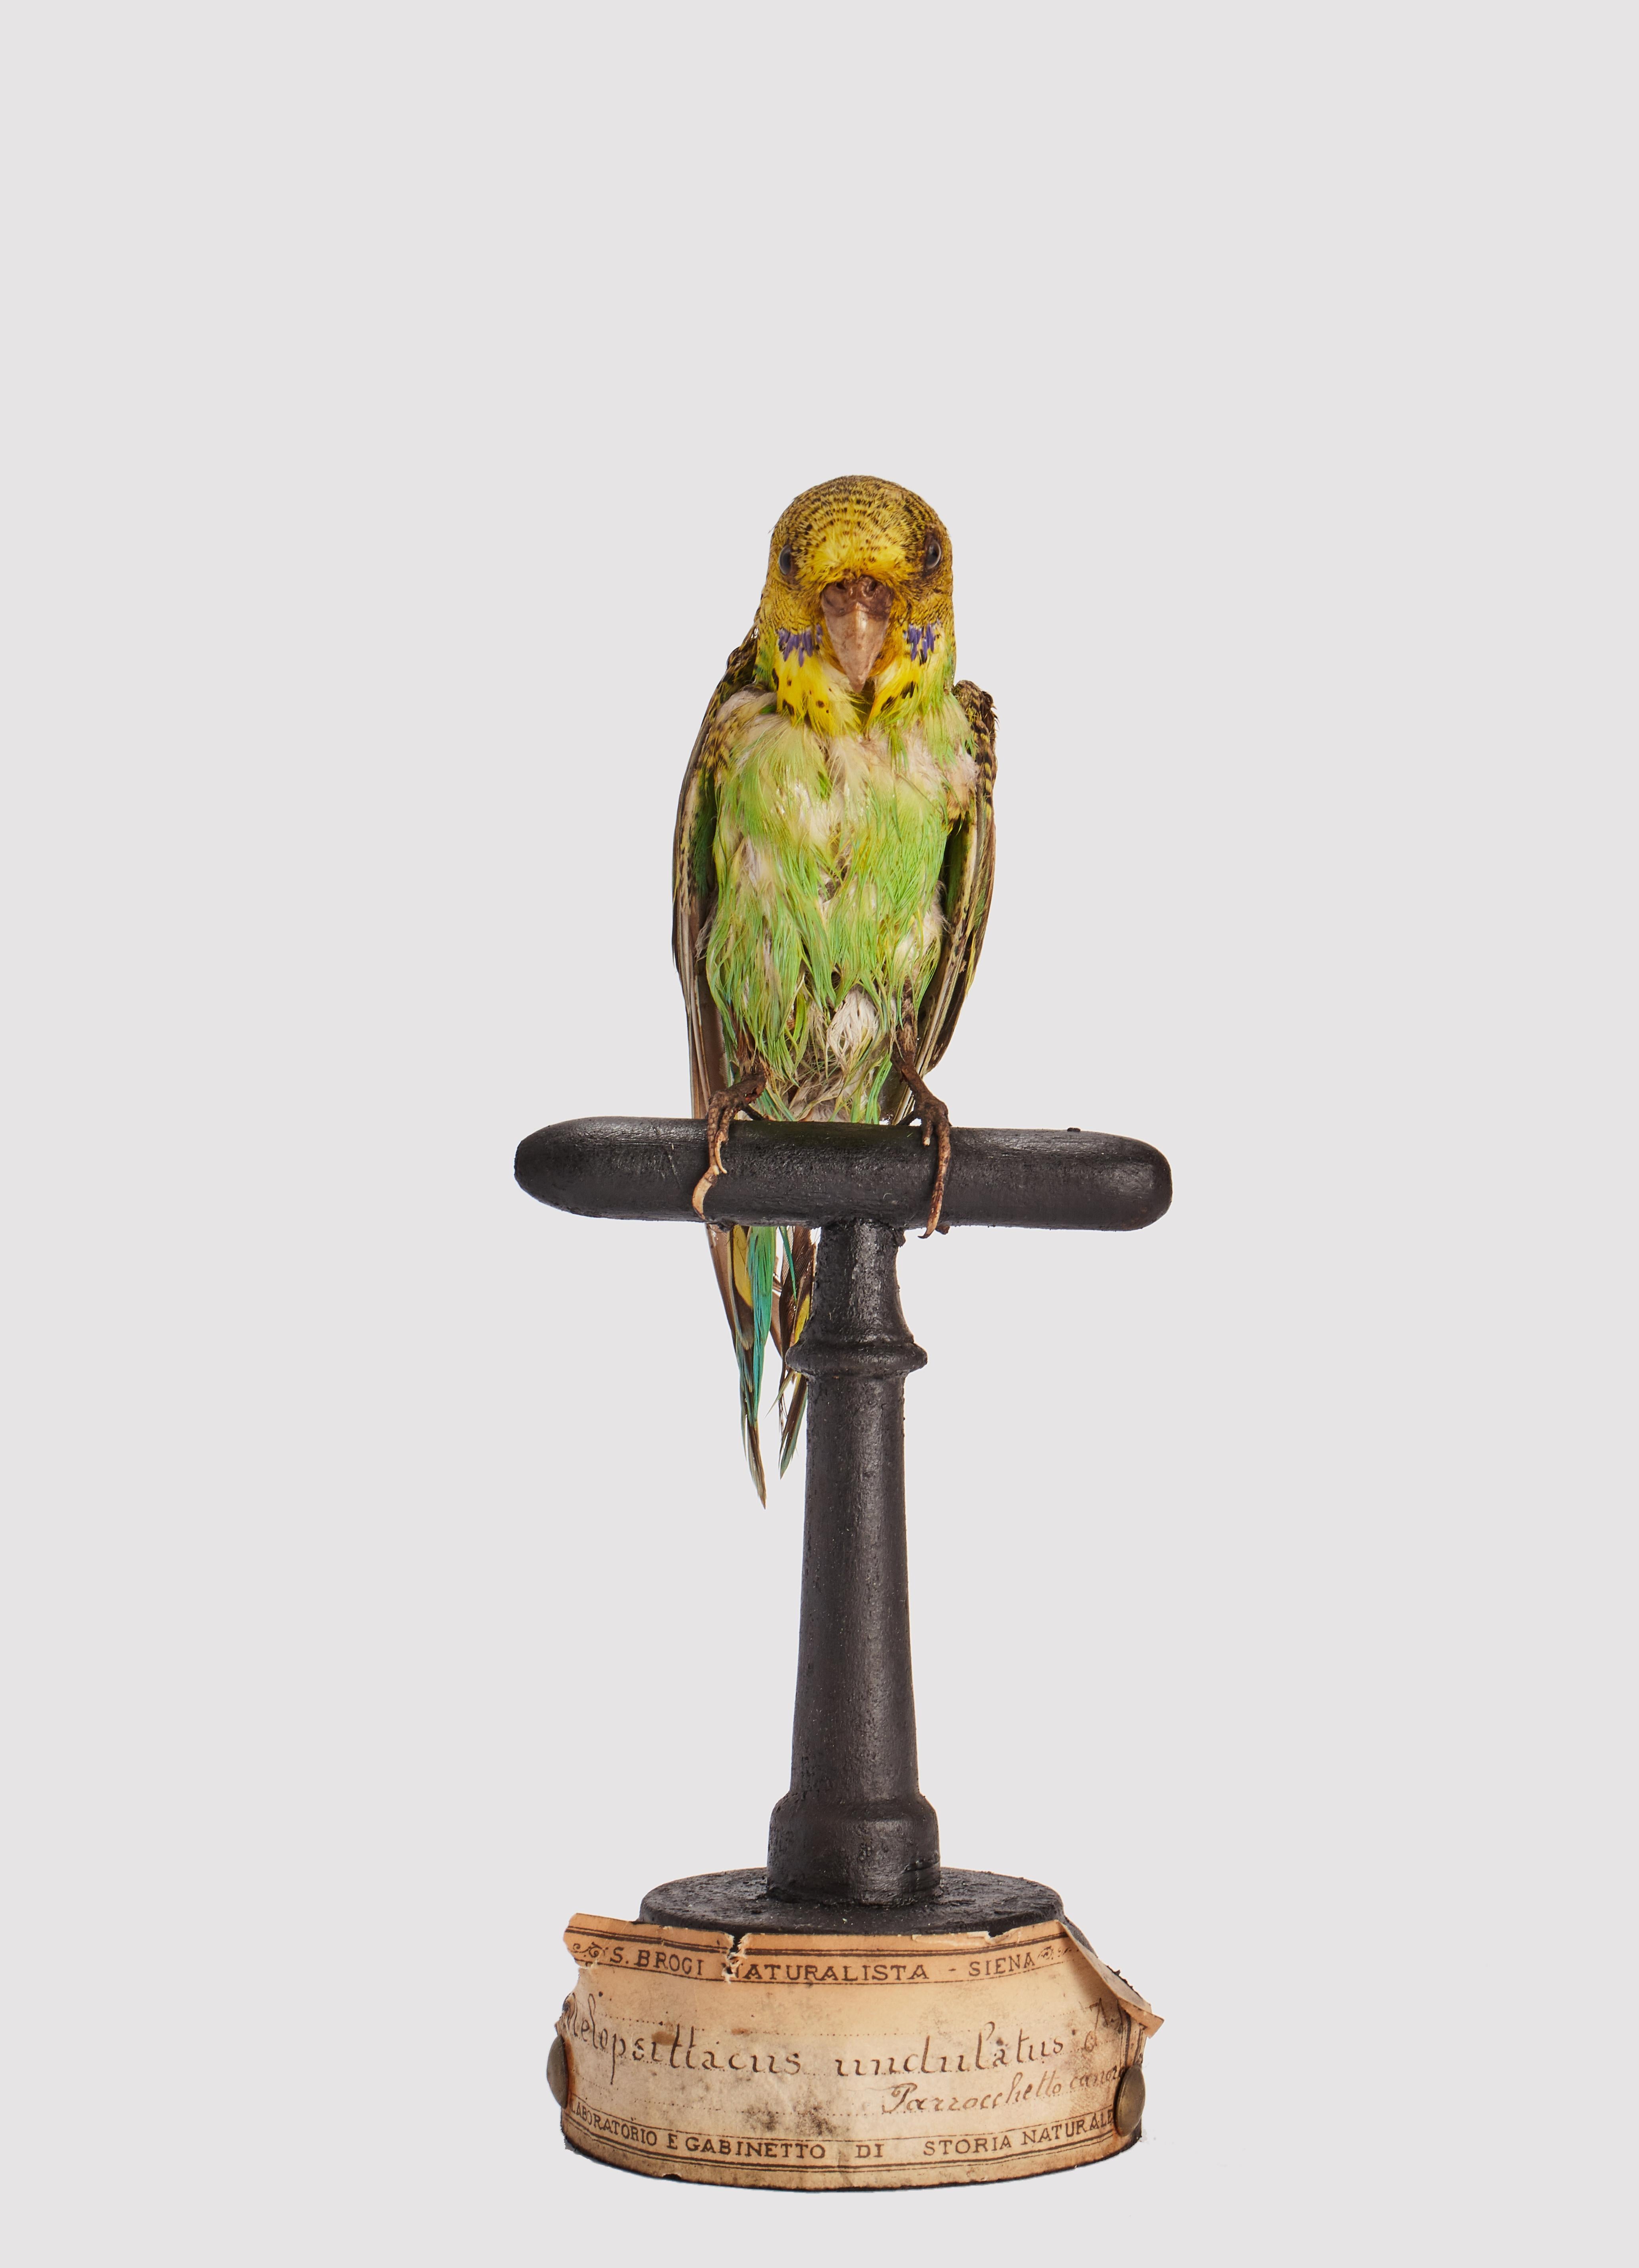 Natural Specimen from Wunderkammer stuffed bird (Melopsittacus undulatus) Corrugated Parakeet on a fruitwood base painted black, with a paper scroll at the base reading: Specimen for laboratories and Natural History cabinet. S. Brogi Naturalist.